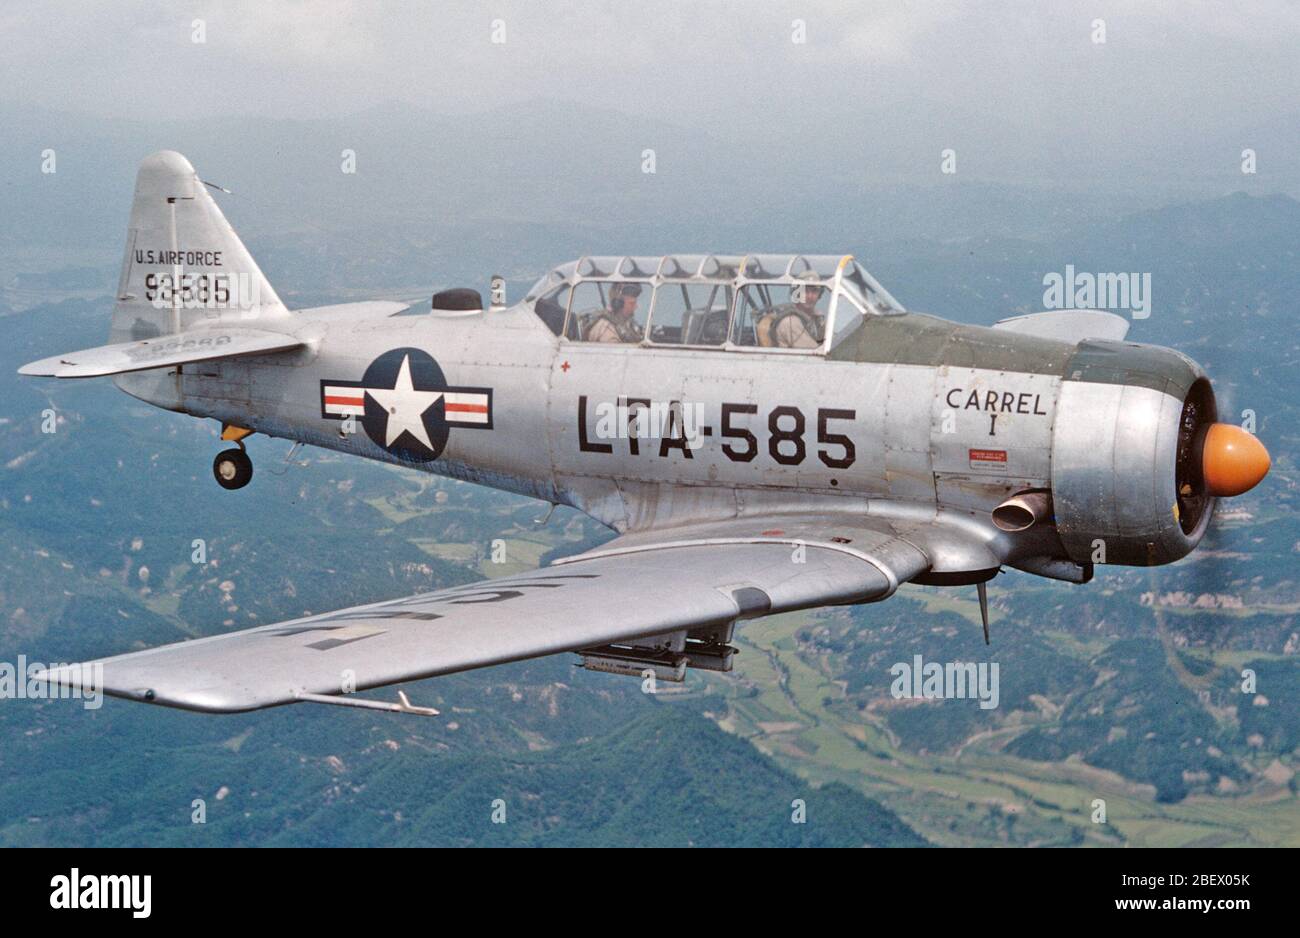 A U.S. Air Force LT-6G aircraft flies in the demilitarized zone over South Korea in the fall of 1953. The North American Aviation T-6 Texan was modified during the Korean War for battlefield surveillance and forward air control, and designated as T-6 'Mosquitos.'  The photo was taken by U.S. Air Force pilot Alexander P. Macdonald. He later became the North Dakota Air National Guard's 119th Fighter Group commander Feb. 28, 1968. He was promoted to brigadier general Dec. 14, 1981 and major general in June, 2983. He was appointed as the North Dakota adjutant general in August, 1984. Stock Photo